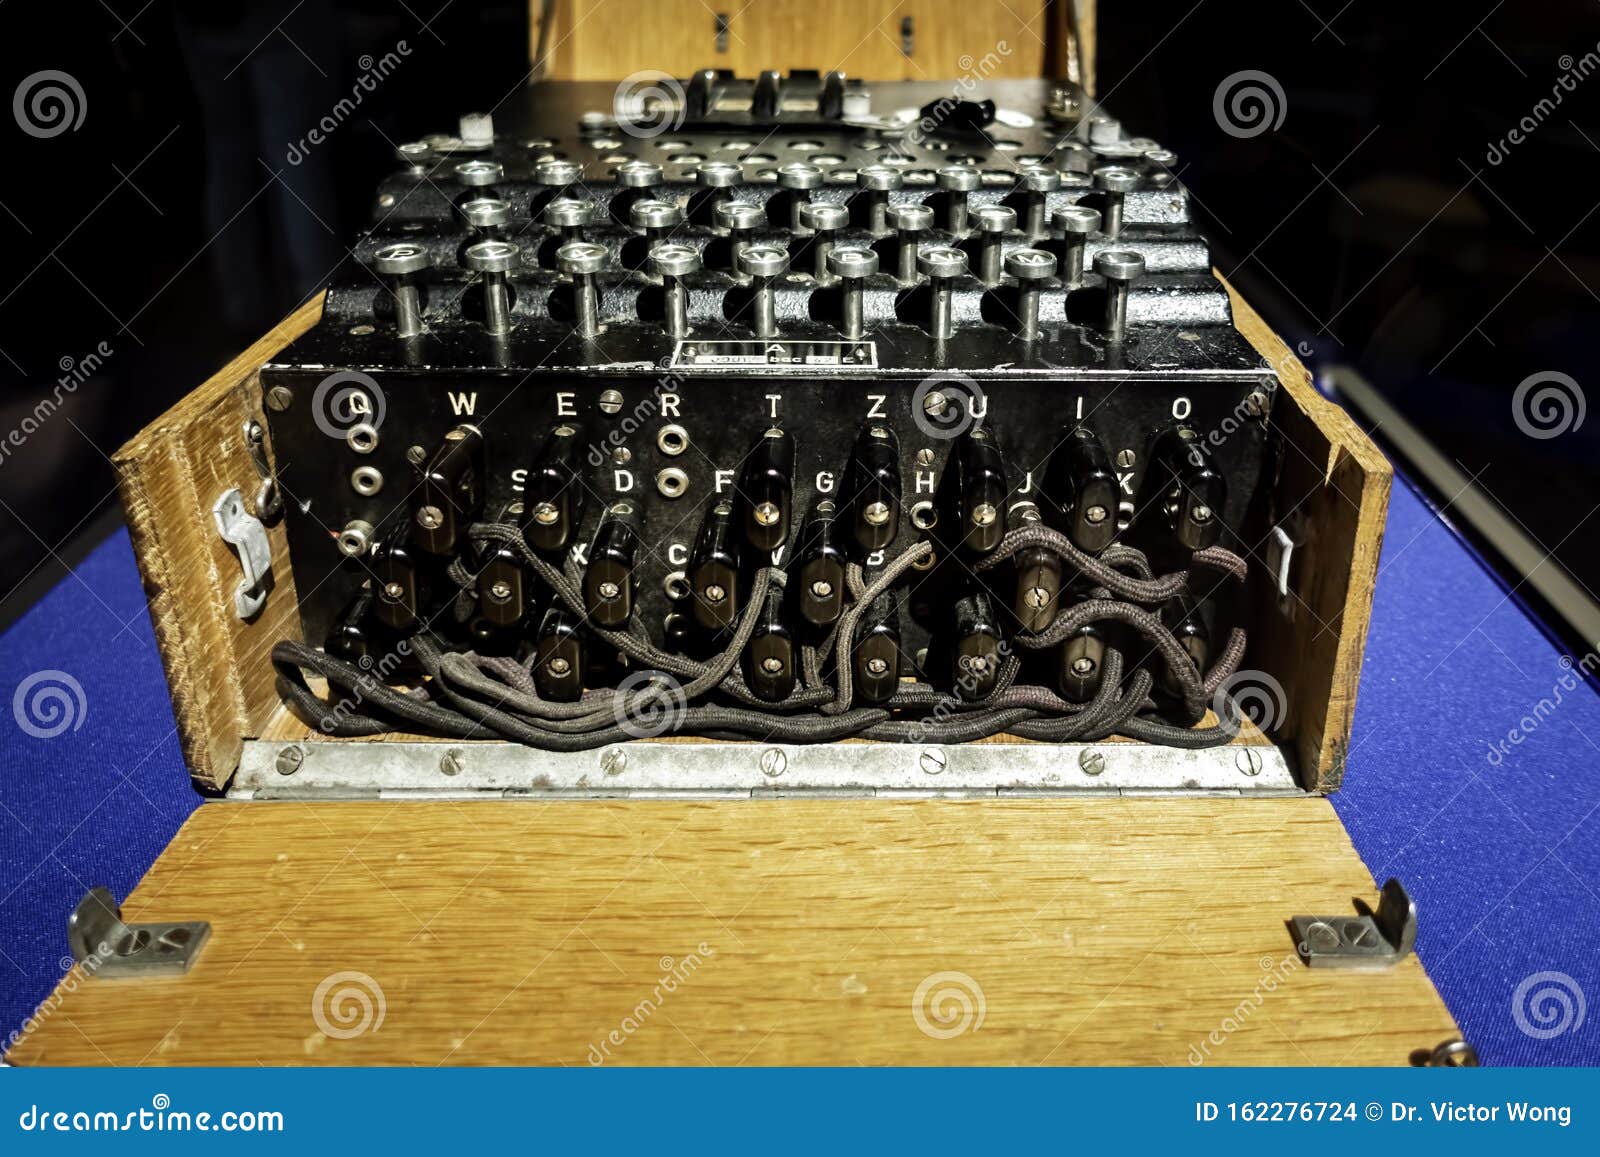 Enigma Machine Photos Free Royalty Free Stock Photos From Dreamstime